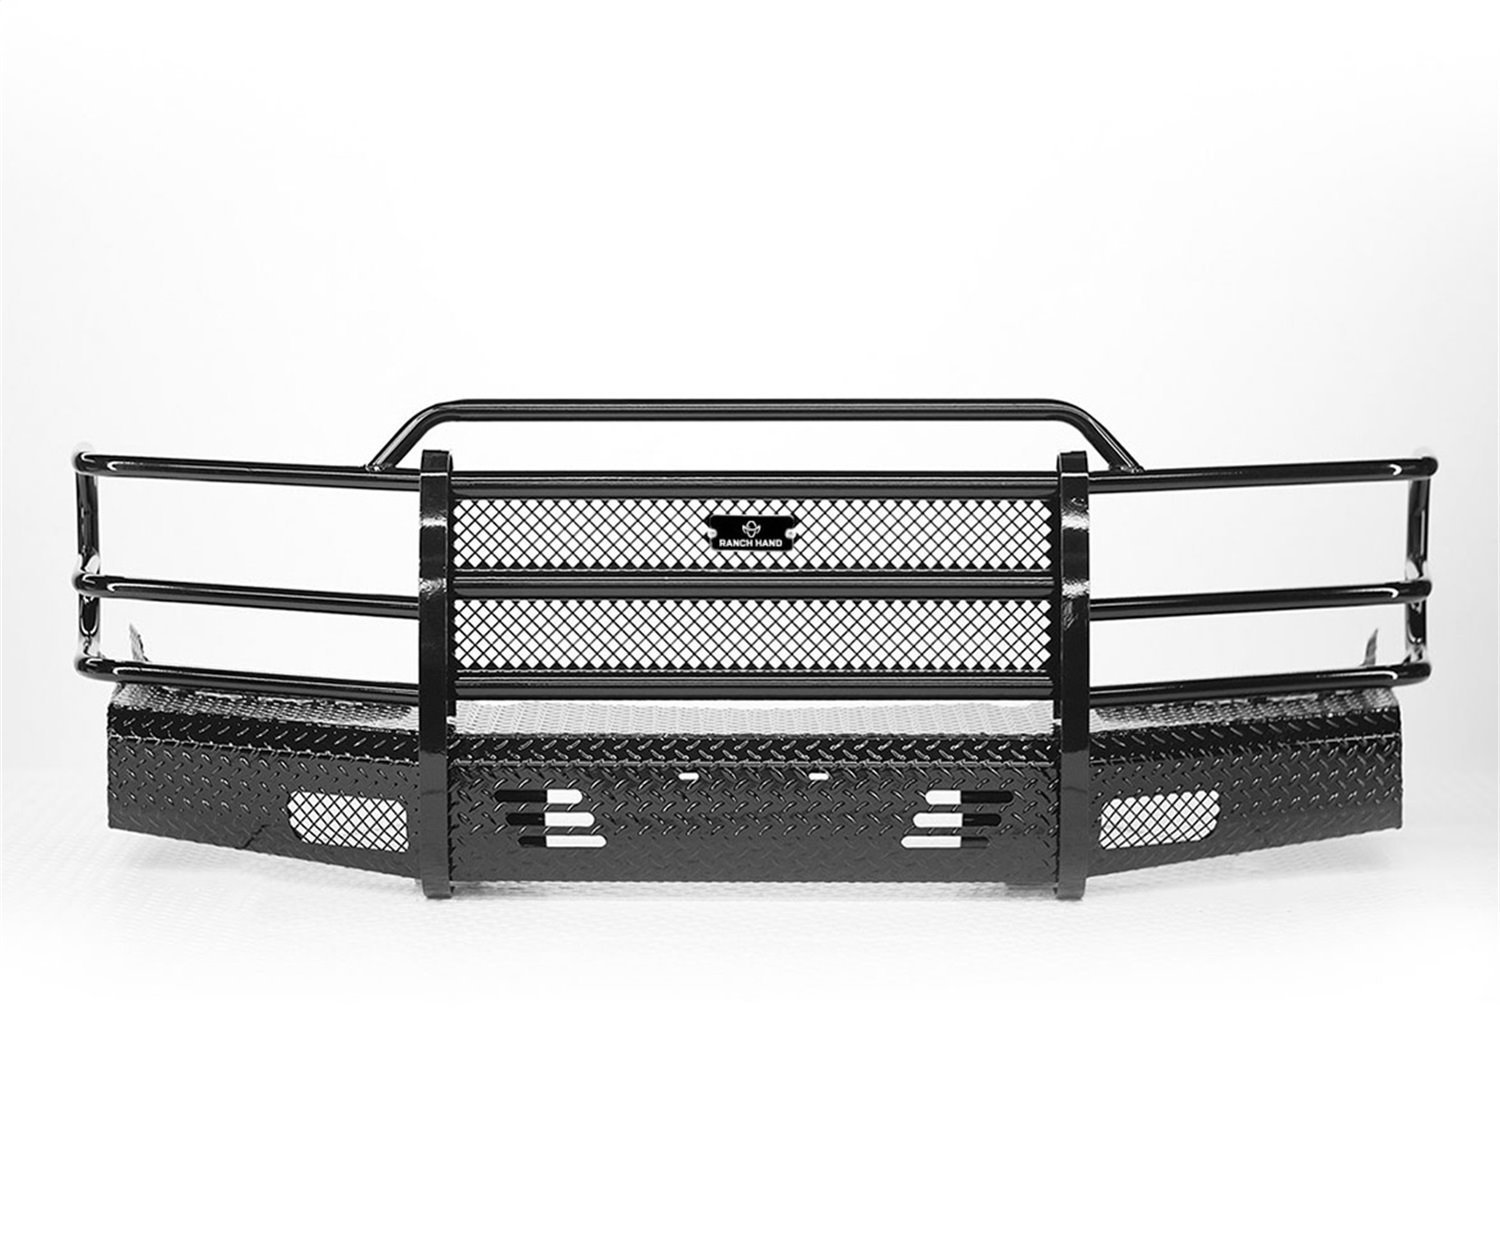 Summit Series Front Bumper For 2000-2006 Chevy Suburban, Tahoe